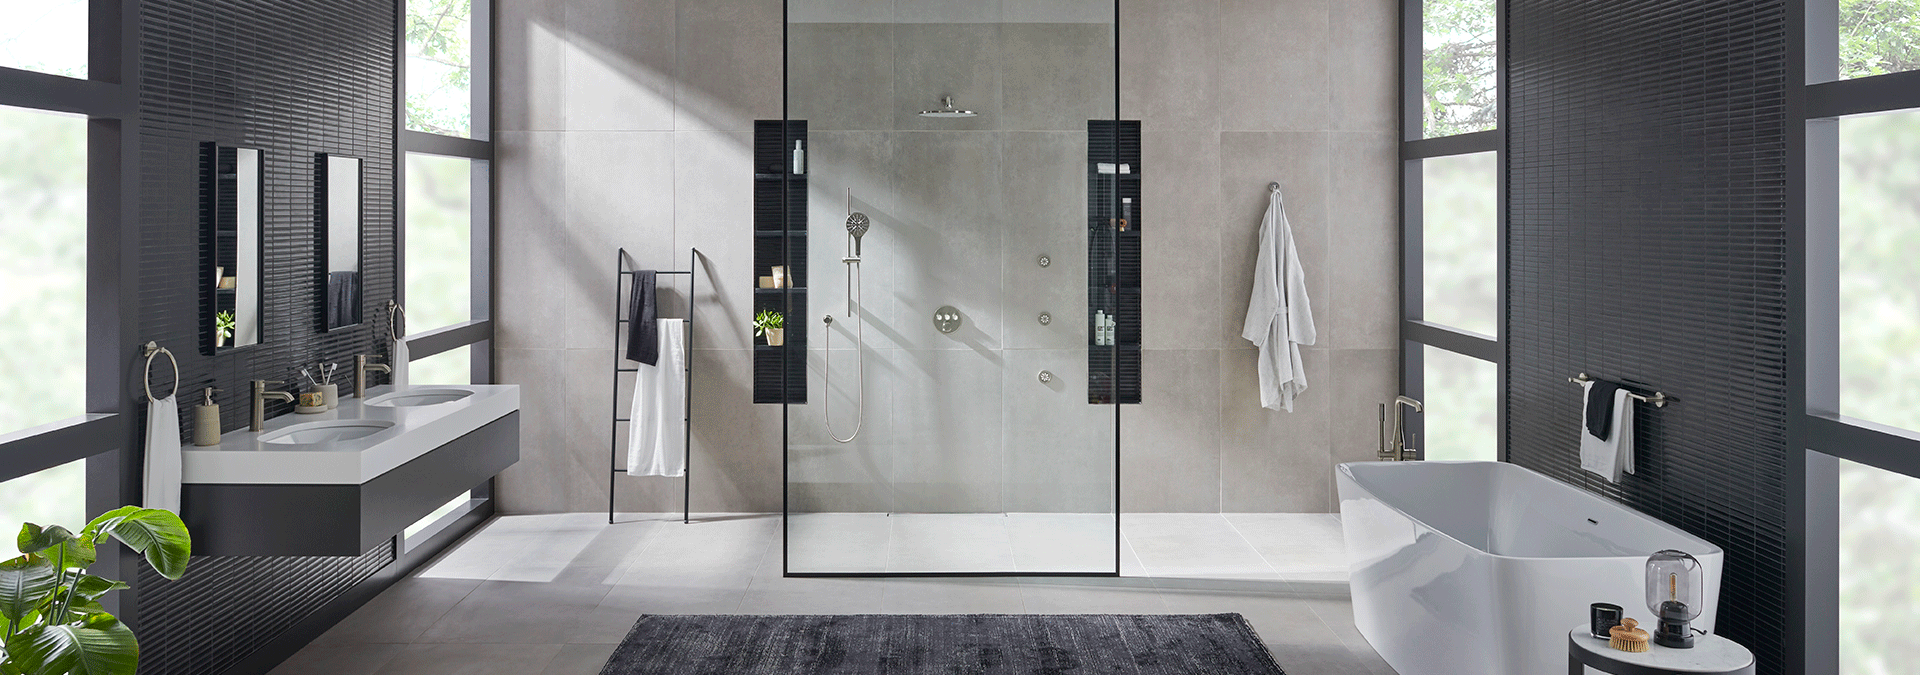 Grohe Visualizer